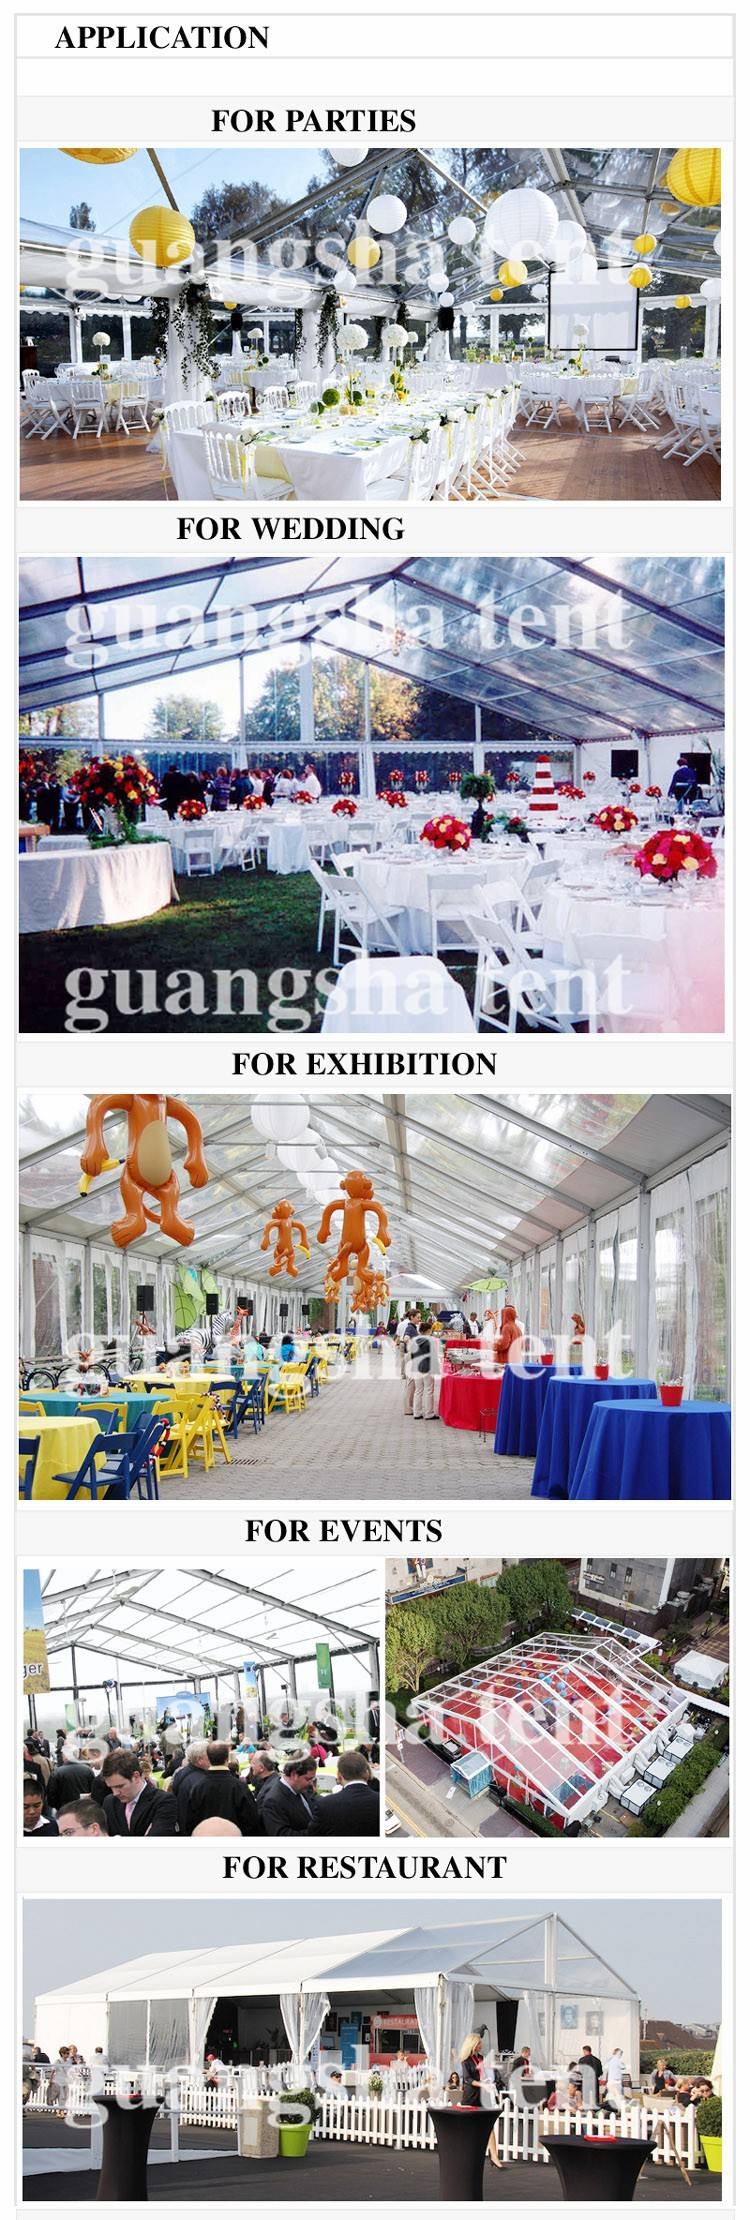 Large Outdoor Clear Span Party Tent Marquee Tent Wedding Party